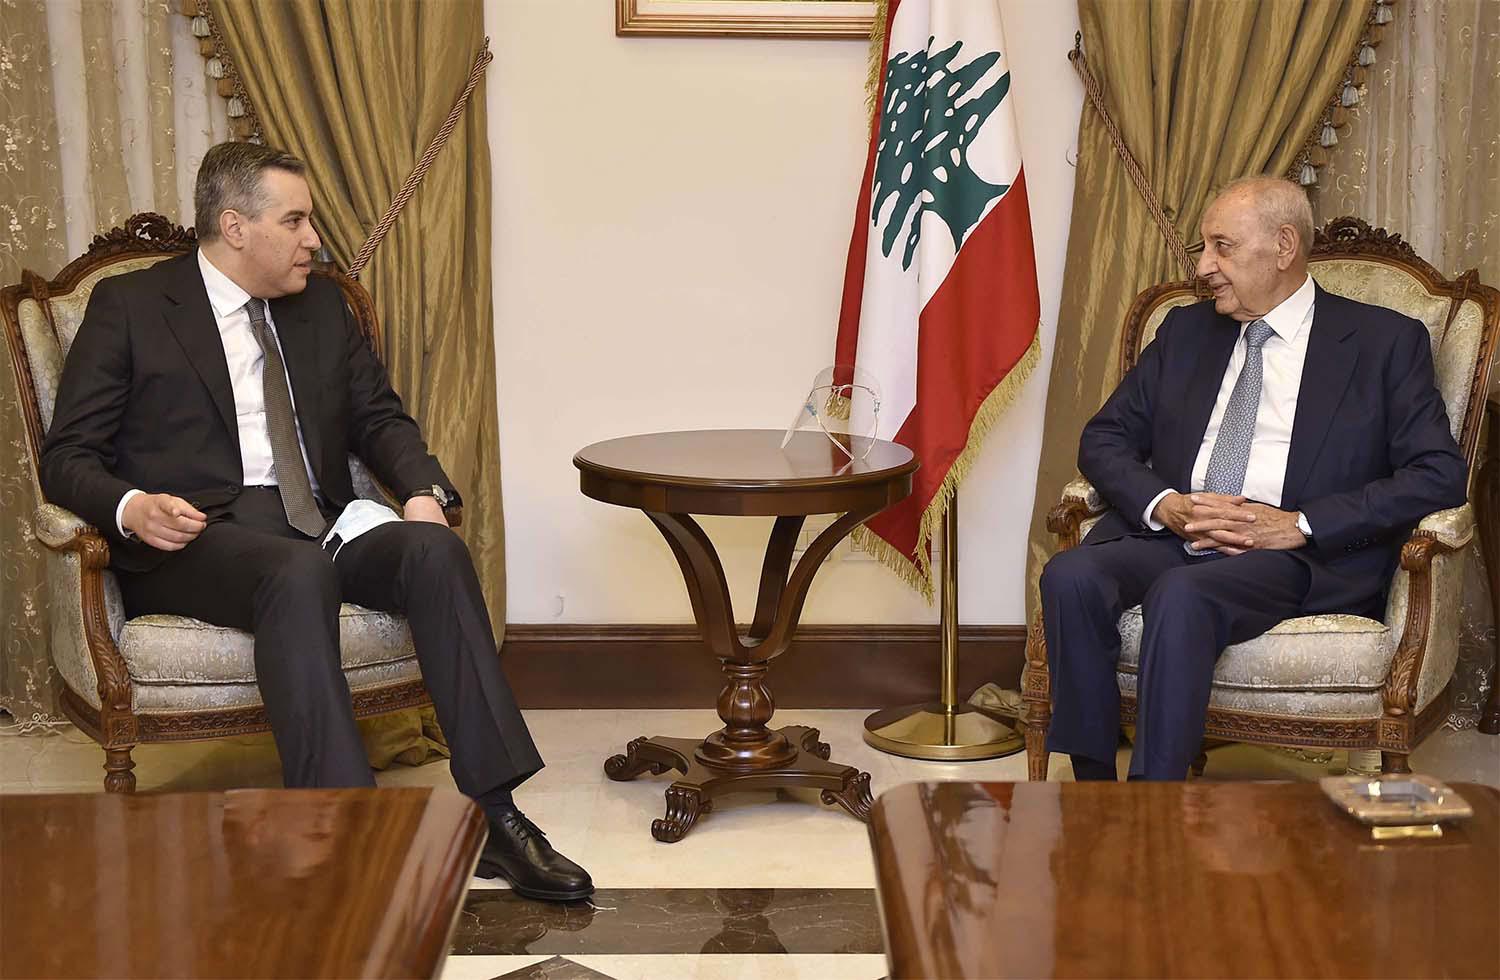 'France regrets that Lebanese officials have not yet managed to keep the commitments made on September 1'